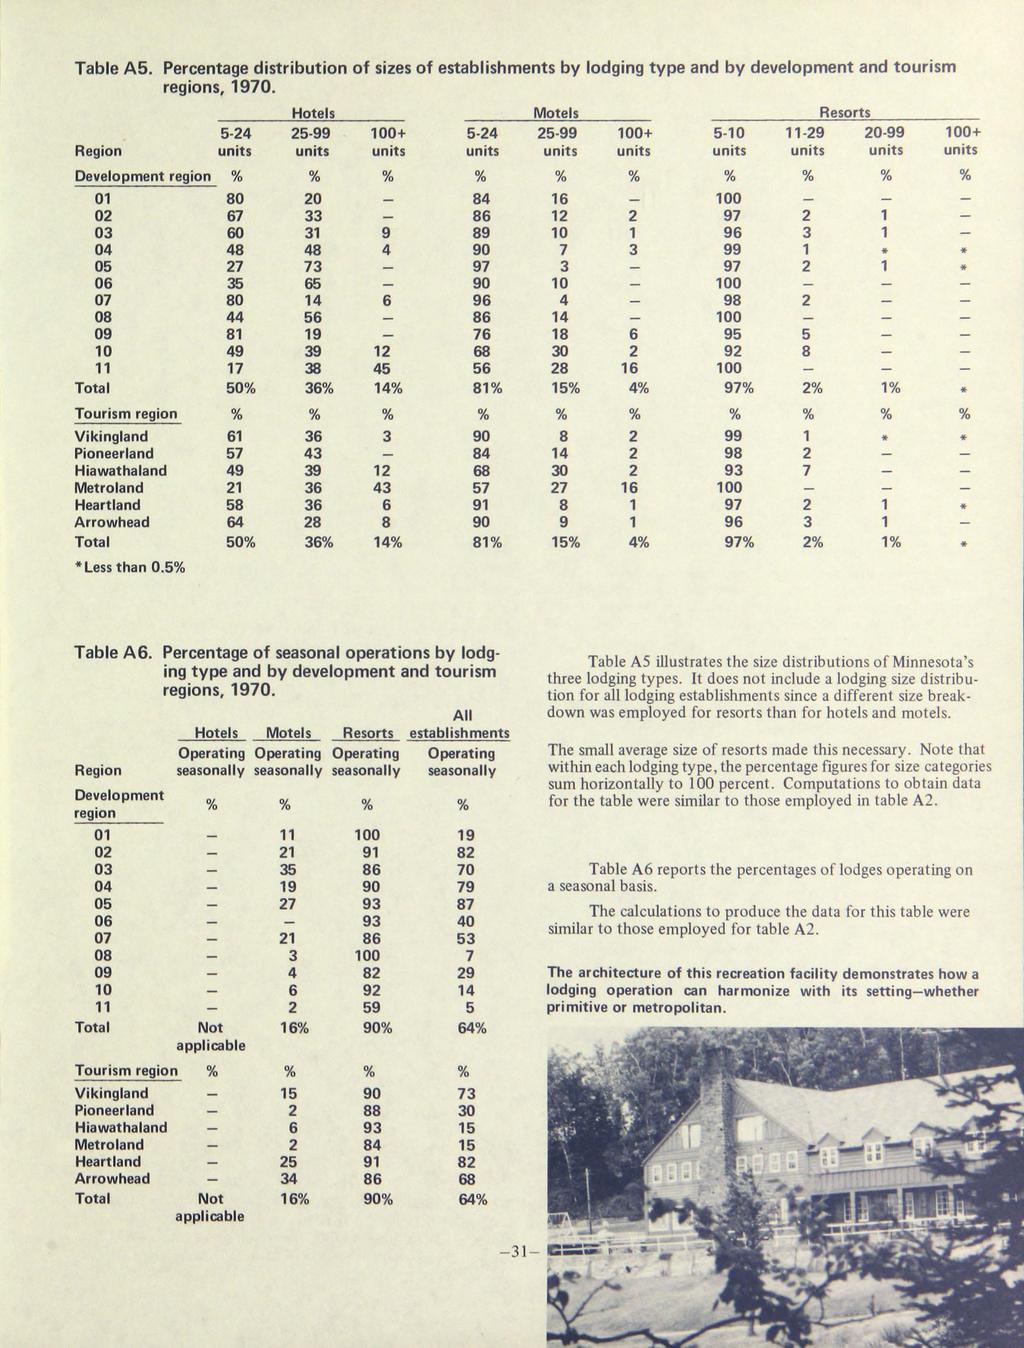 Table AS. Percentage distribution of sizes of establishments by lodging type and by development and tourism regions, 1970.